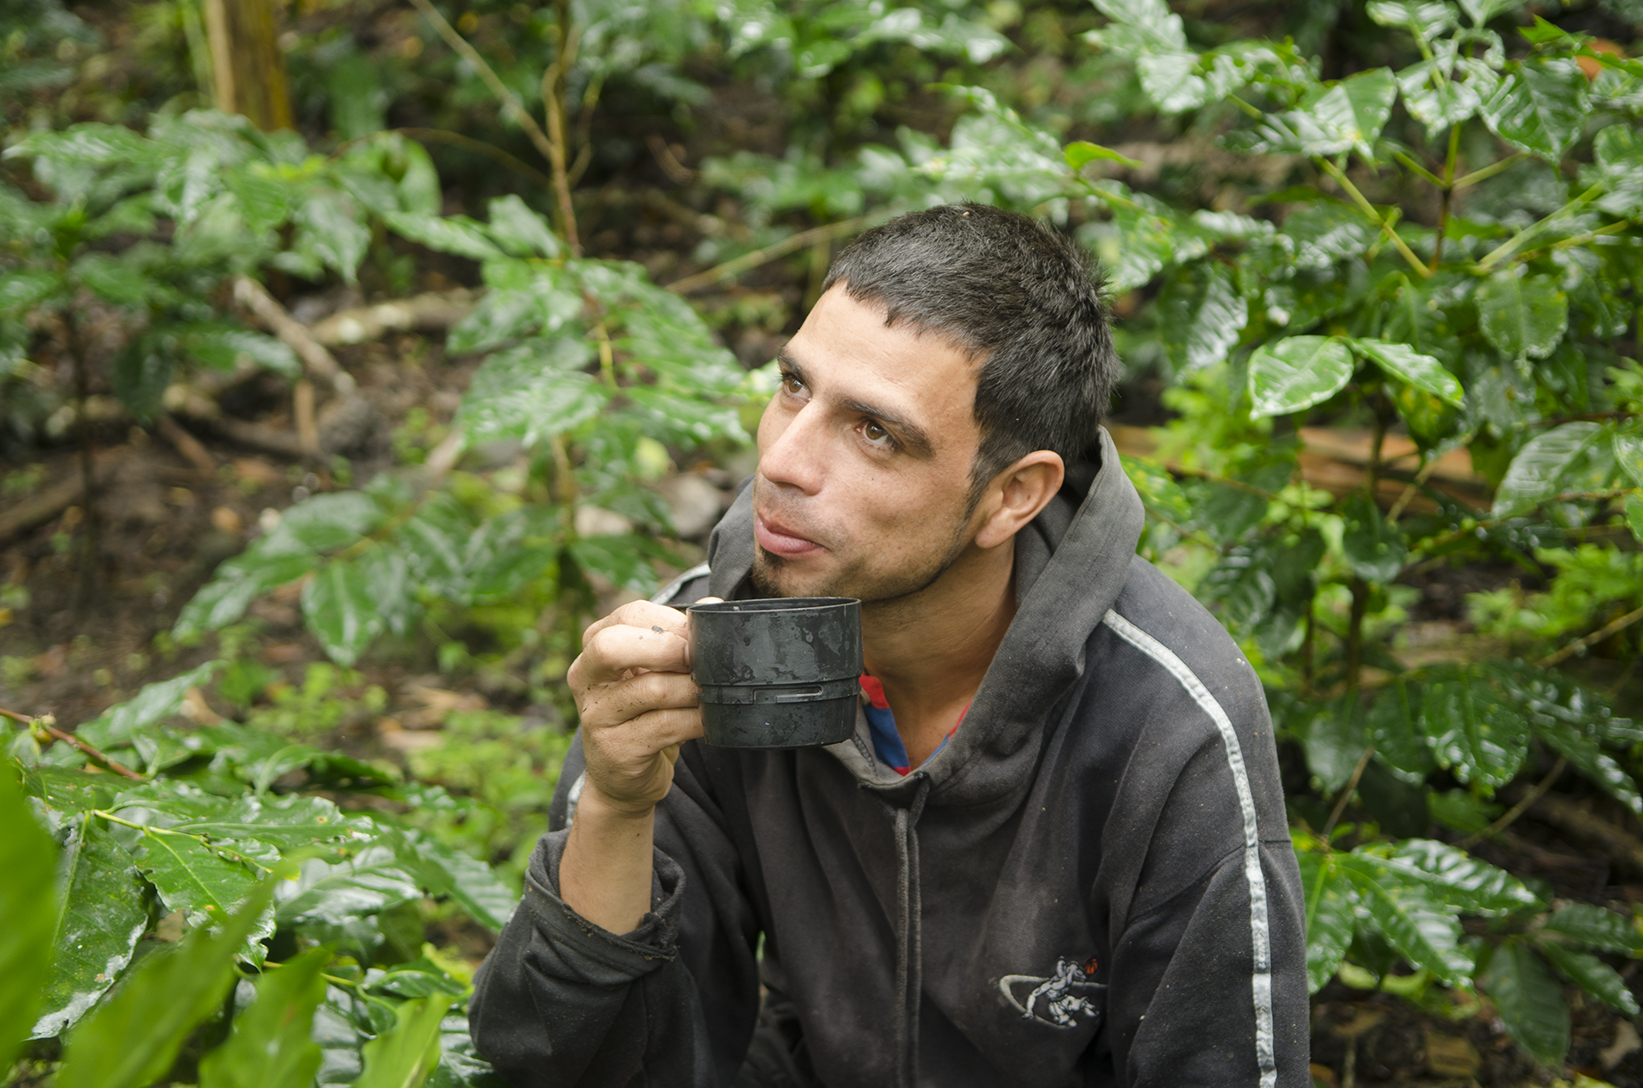  A coffee grower takes a break to drink some of his own product during the harvest. 